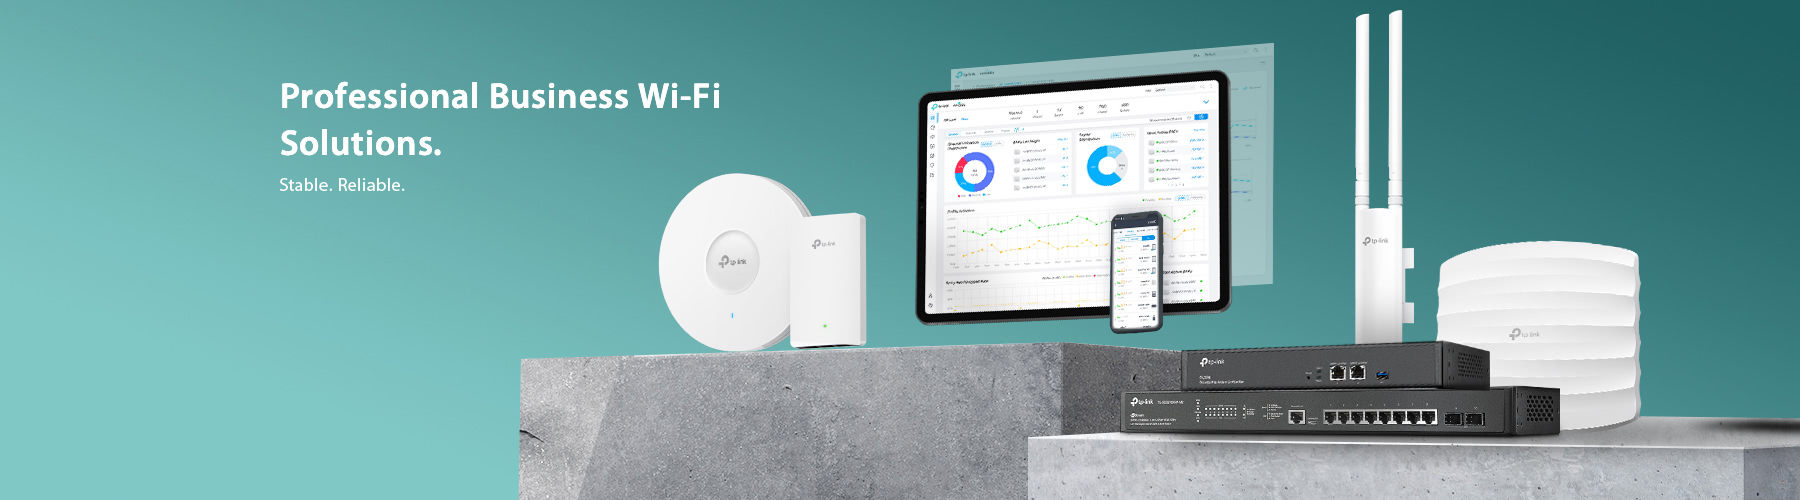 Professional Business Wi-Fi Solutions